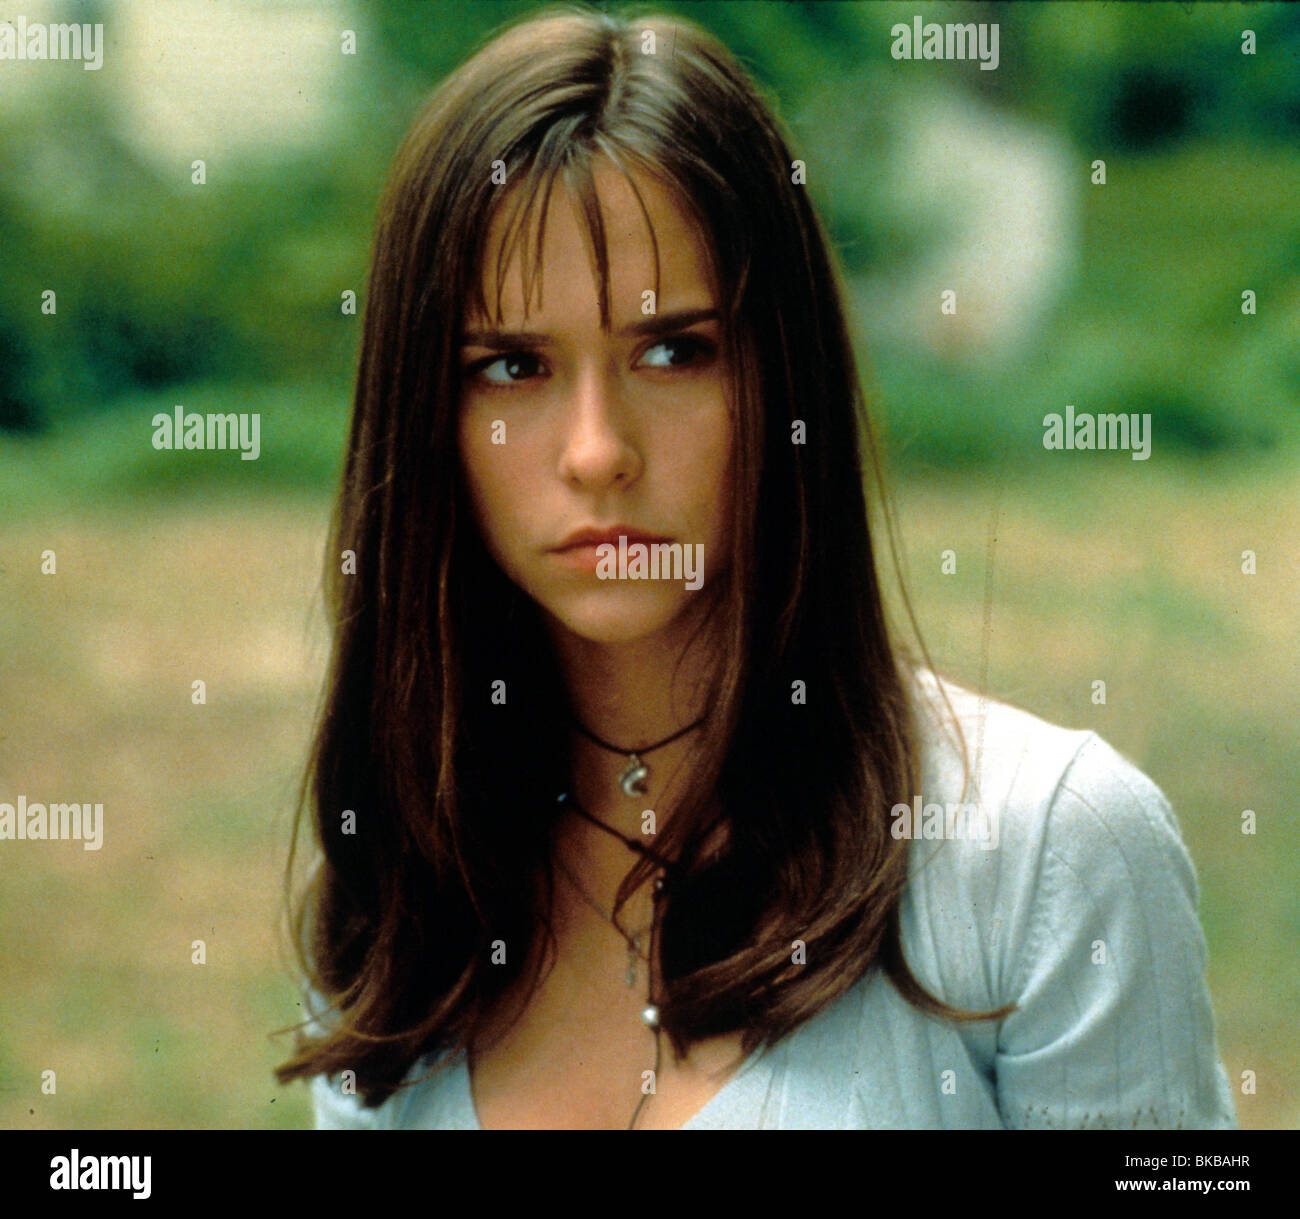 I KNOW WHAT YOU DID LAST SUMMER (1997) JENNIFER LOVE HEWITT IKWY 115 Stock Photo